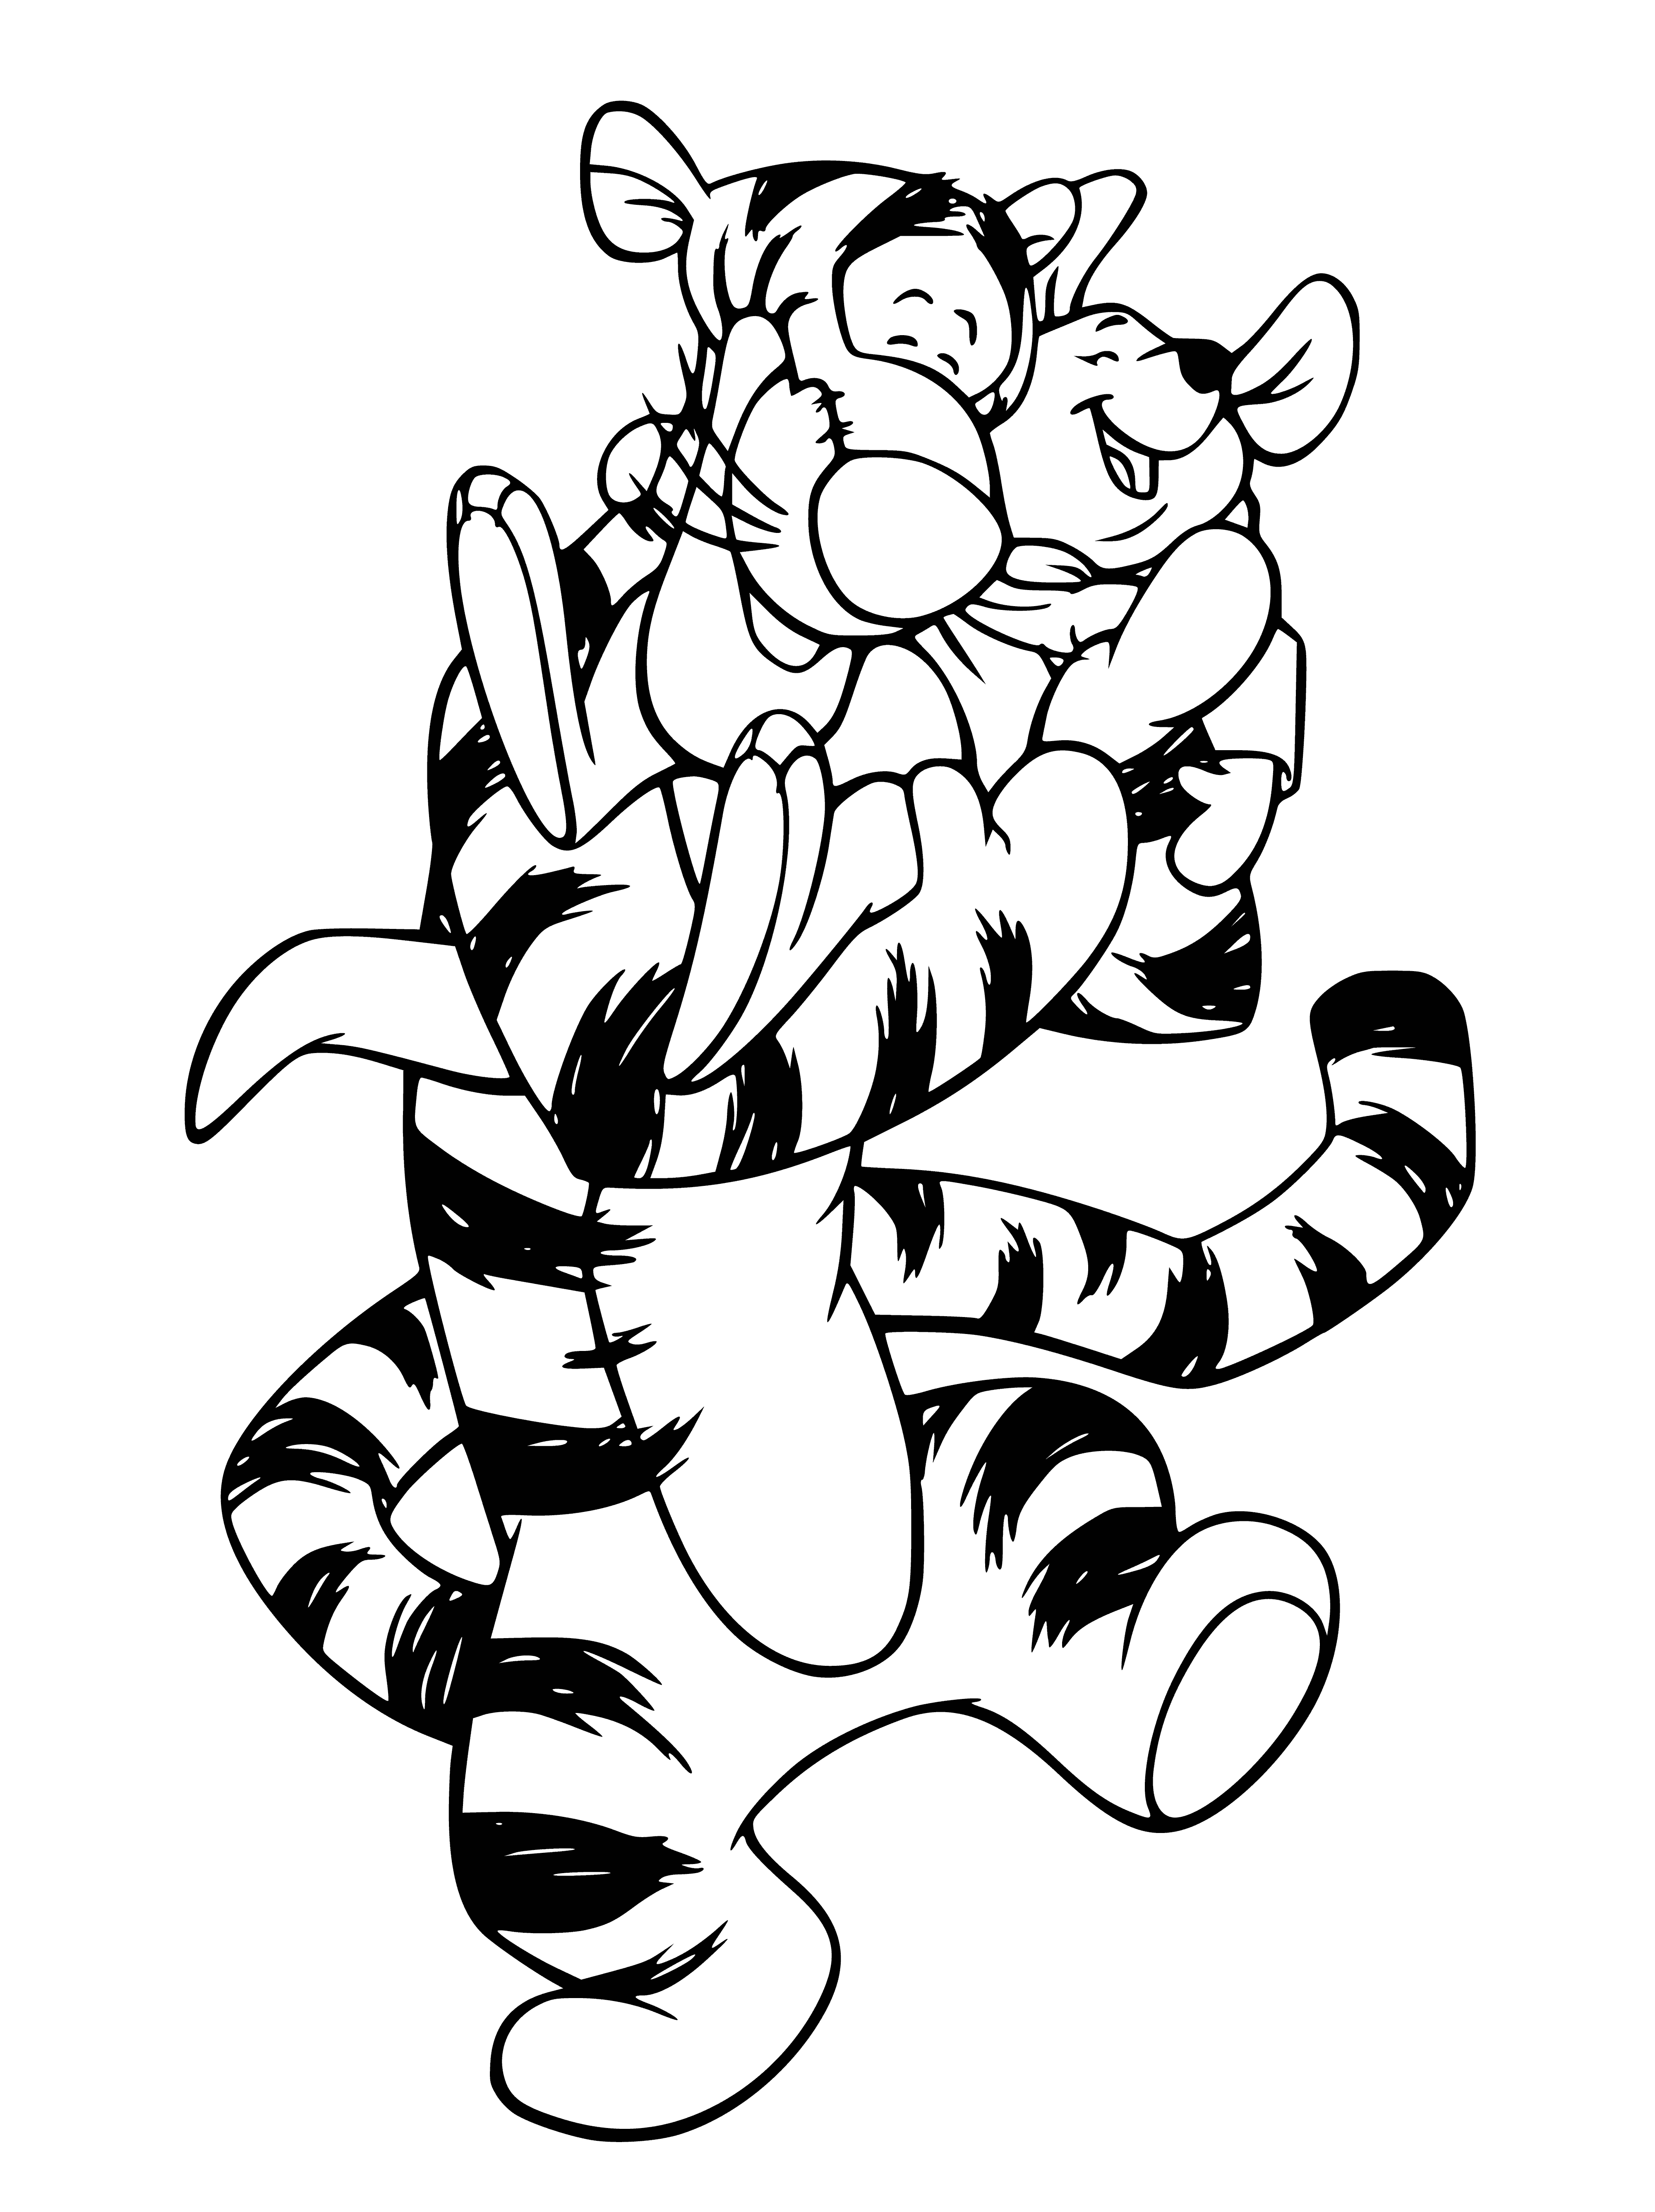 Tigger and baby Roo coloring page